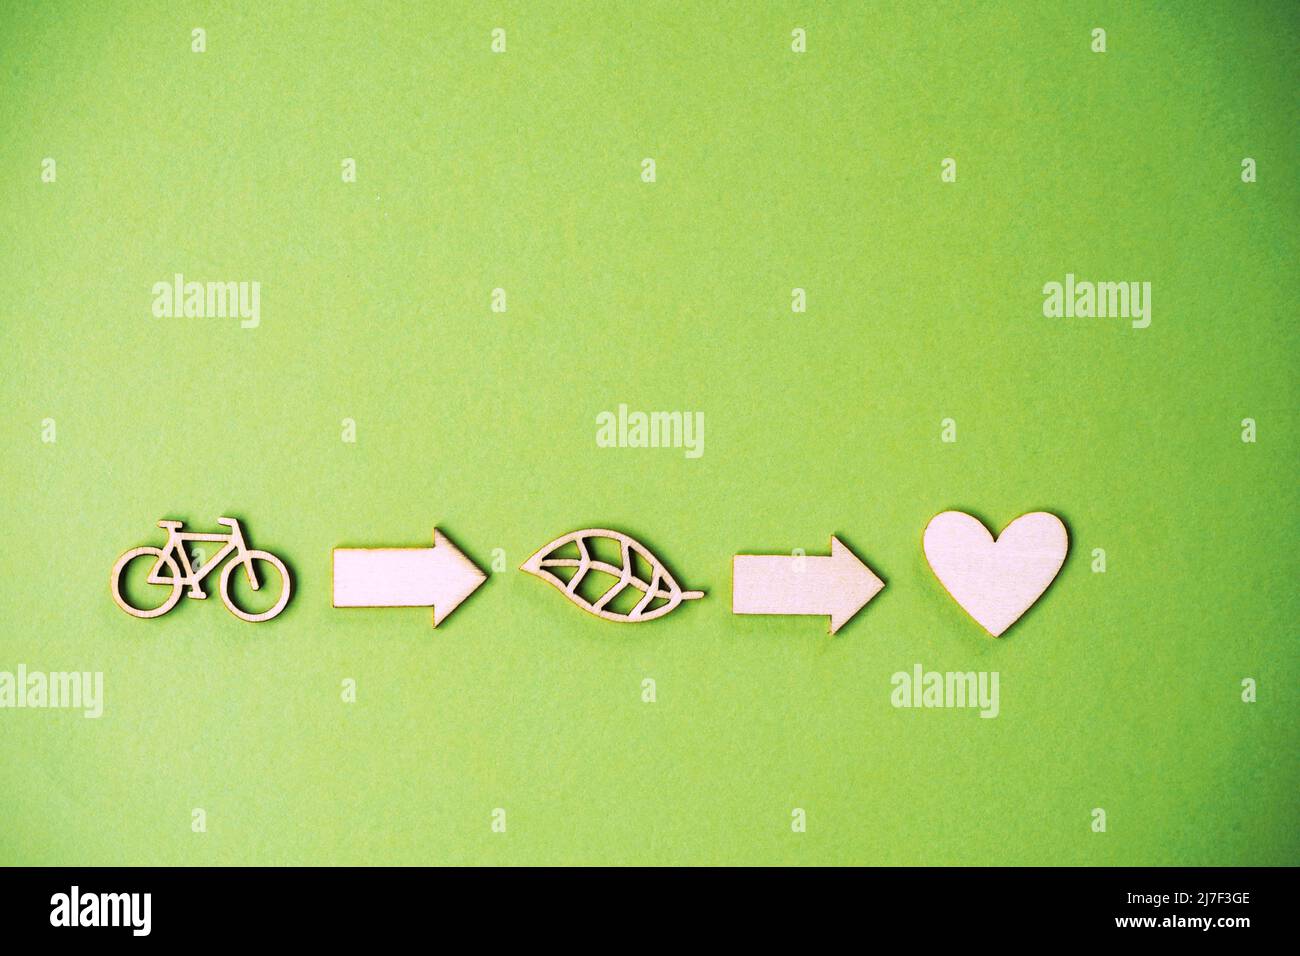 Diagram of a Conceptual image about use a bicycle and the value of that for the environment and health Stock Photo